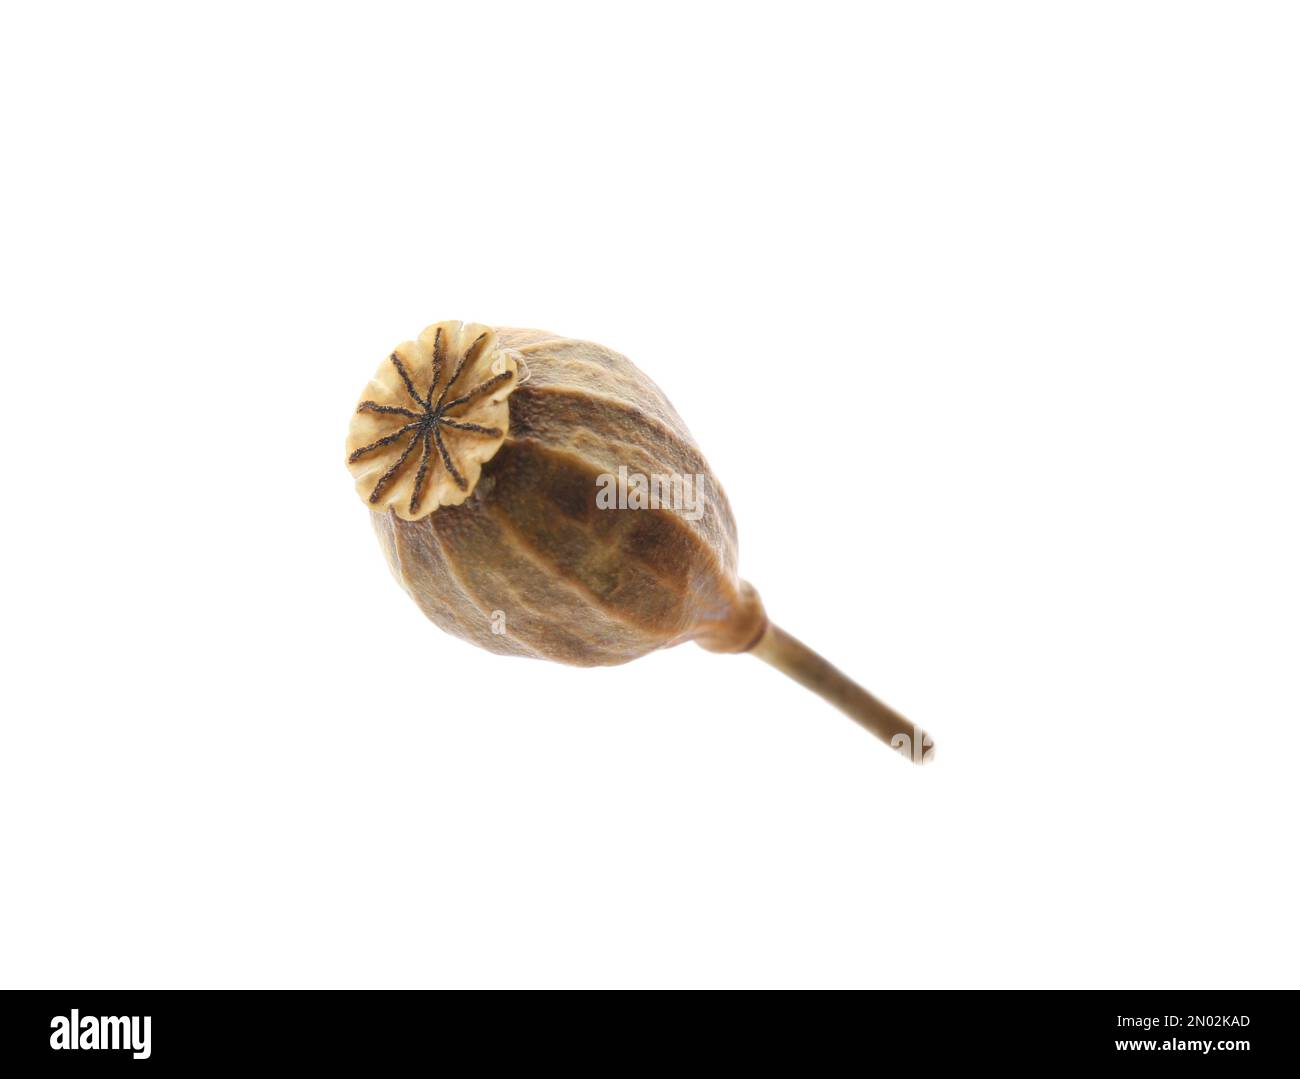 Dried poppyhead with seeds isolated on white Stock Photo